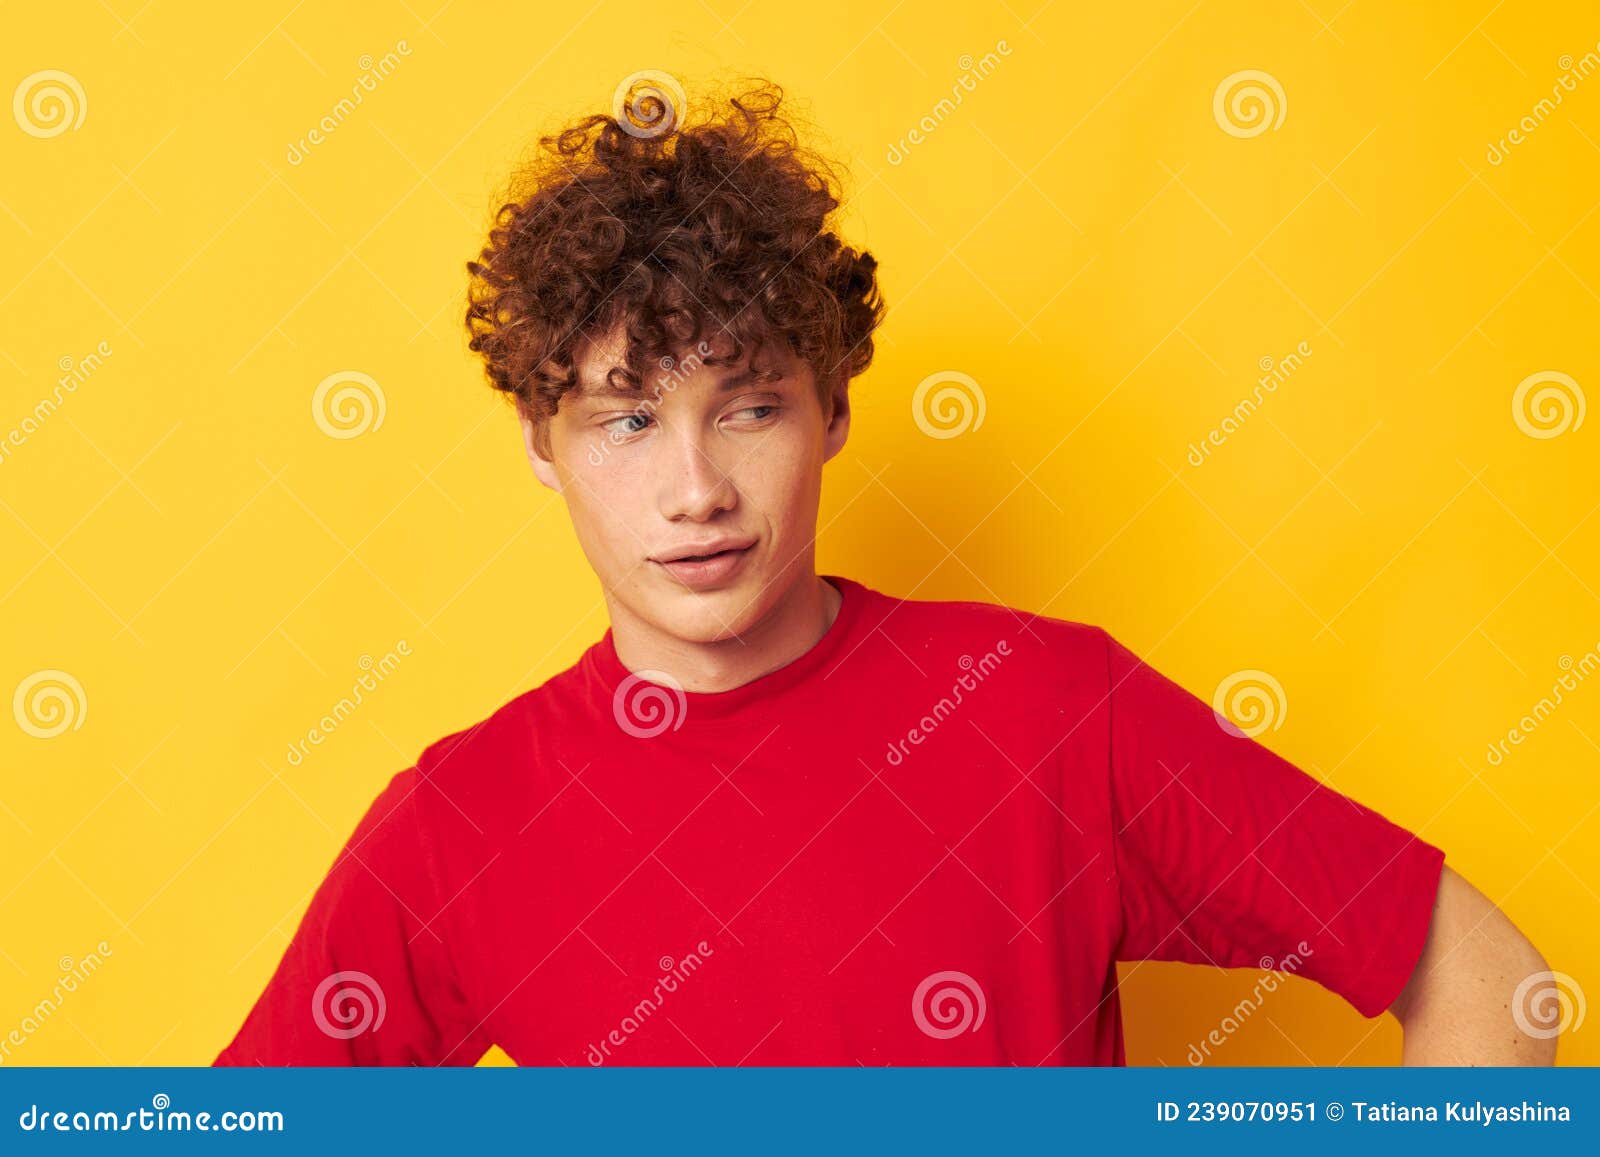 Cute Red-haired Guy Red T Shirt Fun Posing Casual Wear Isolated ...